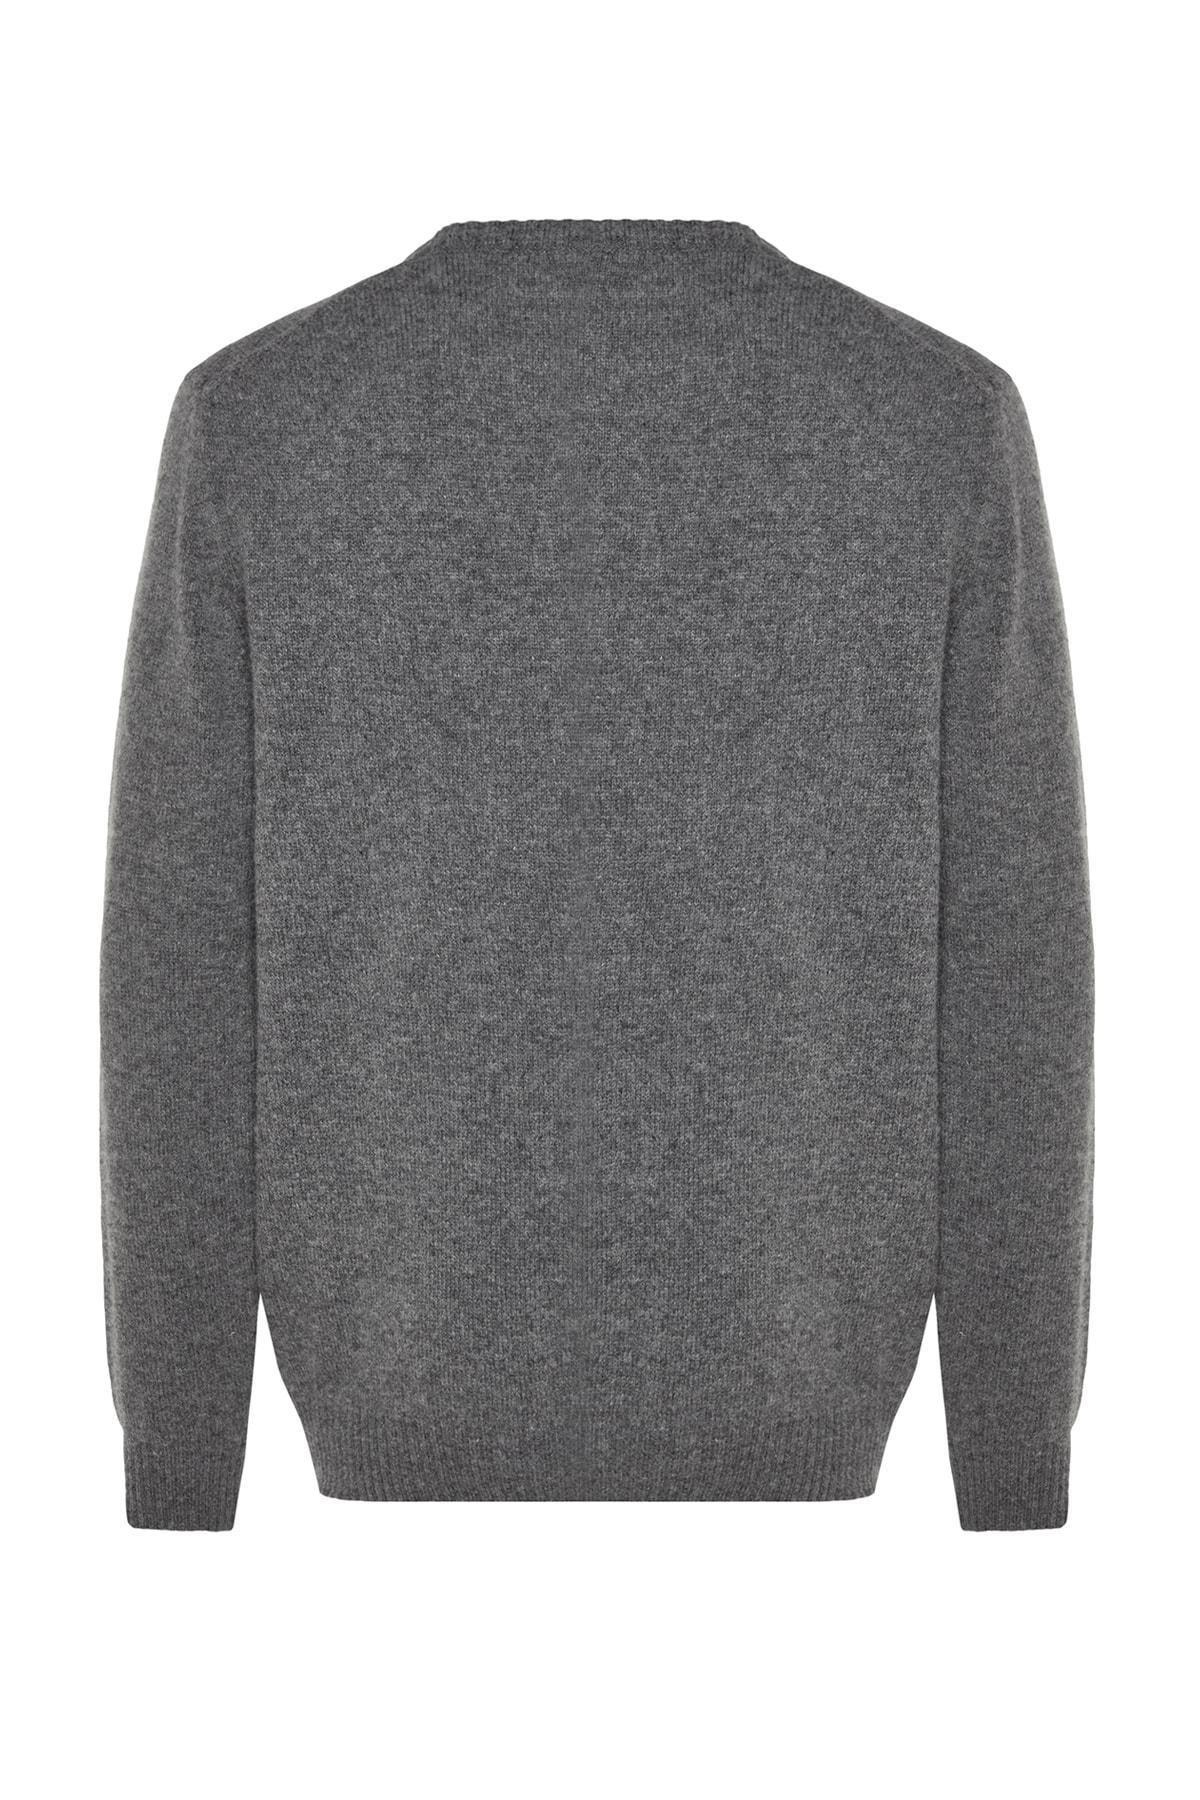 Trendyol - Gray Crew Neck Limited Edition Knitted Sweater<br>